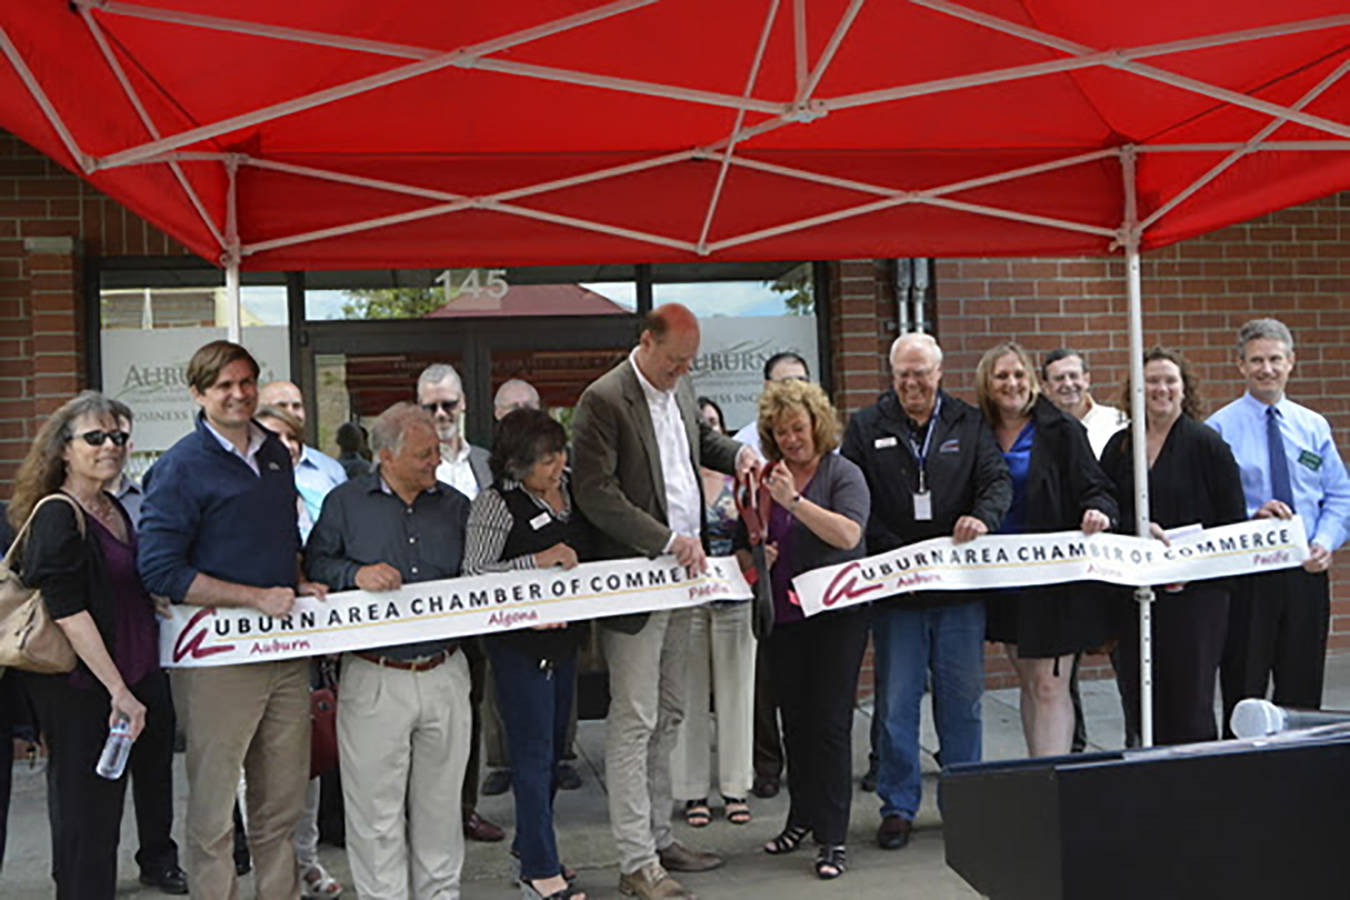 City launches small business incubator in partnership with Port of Seattle